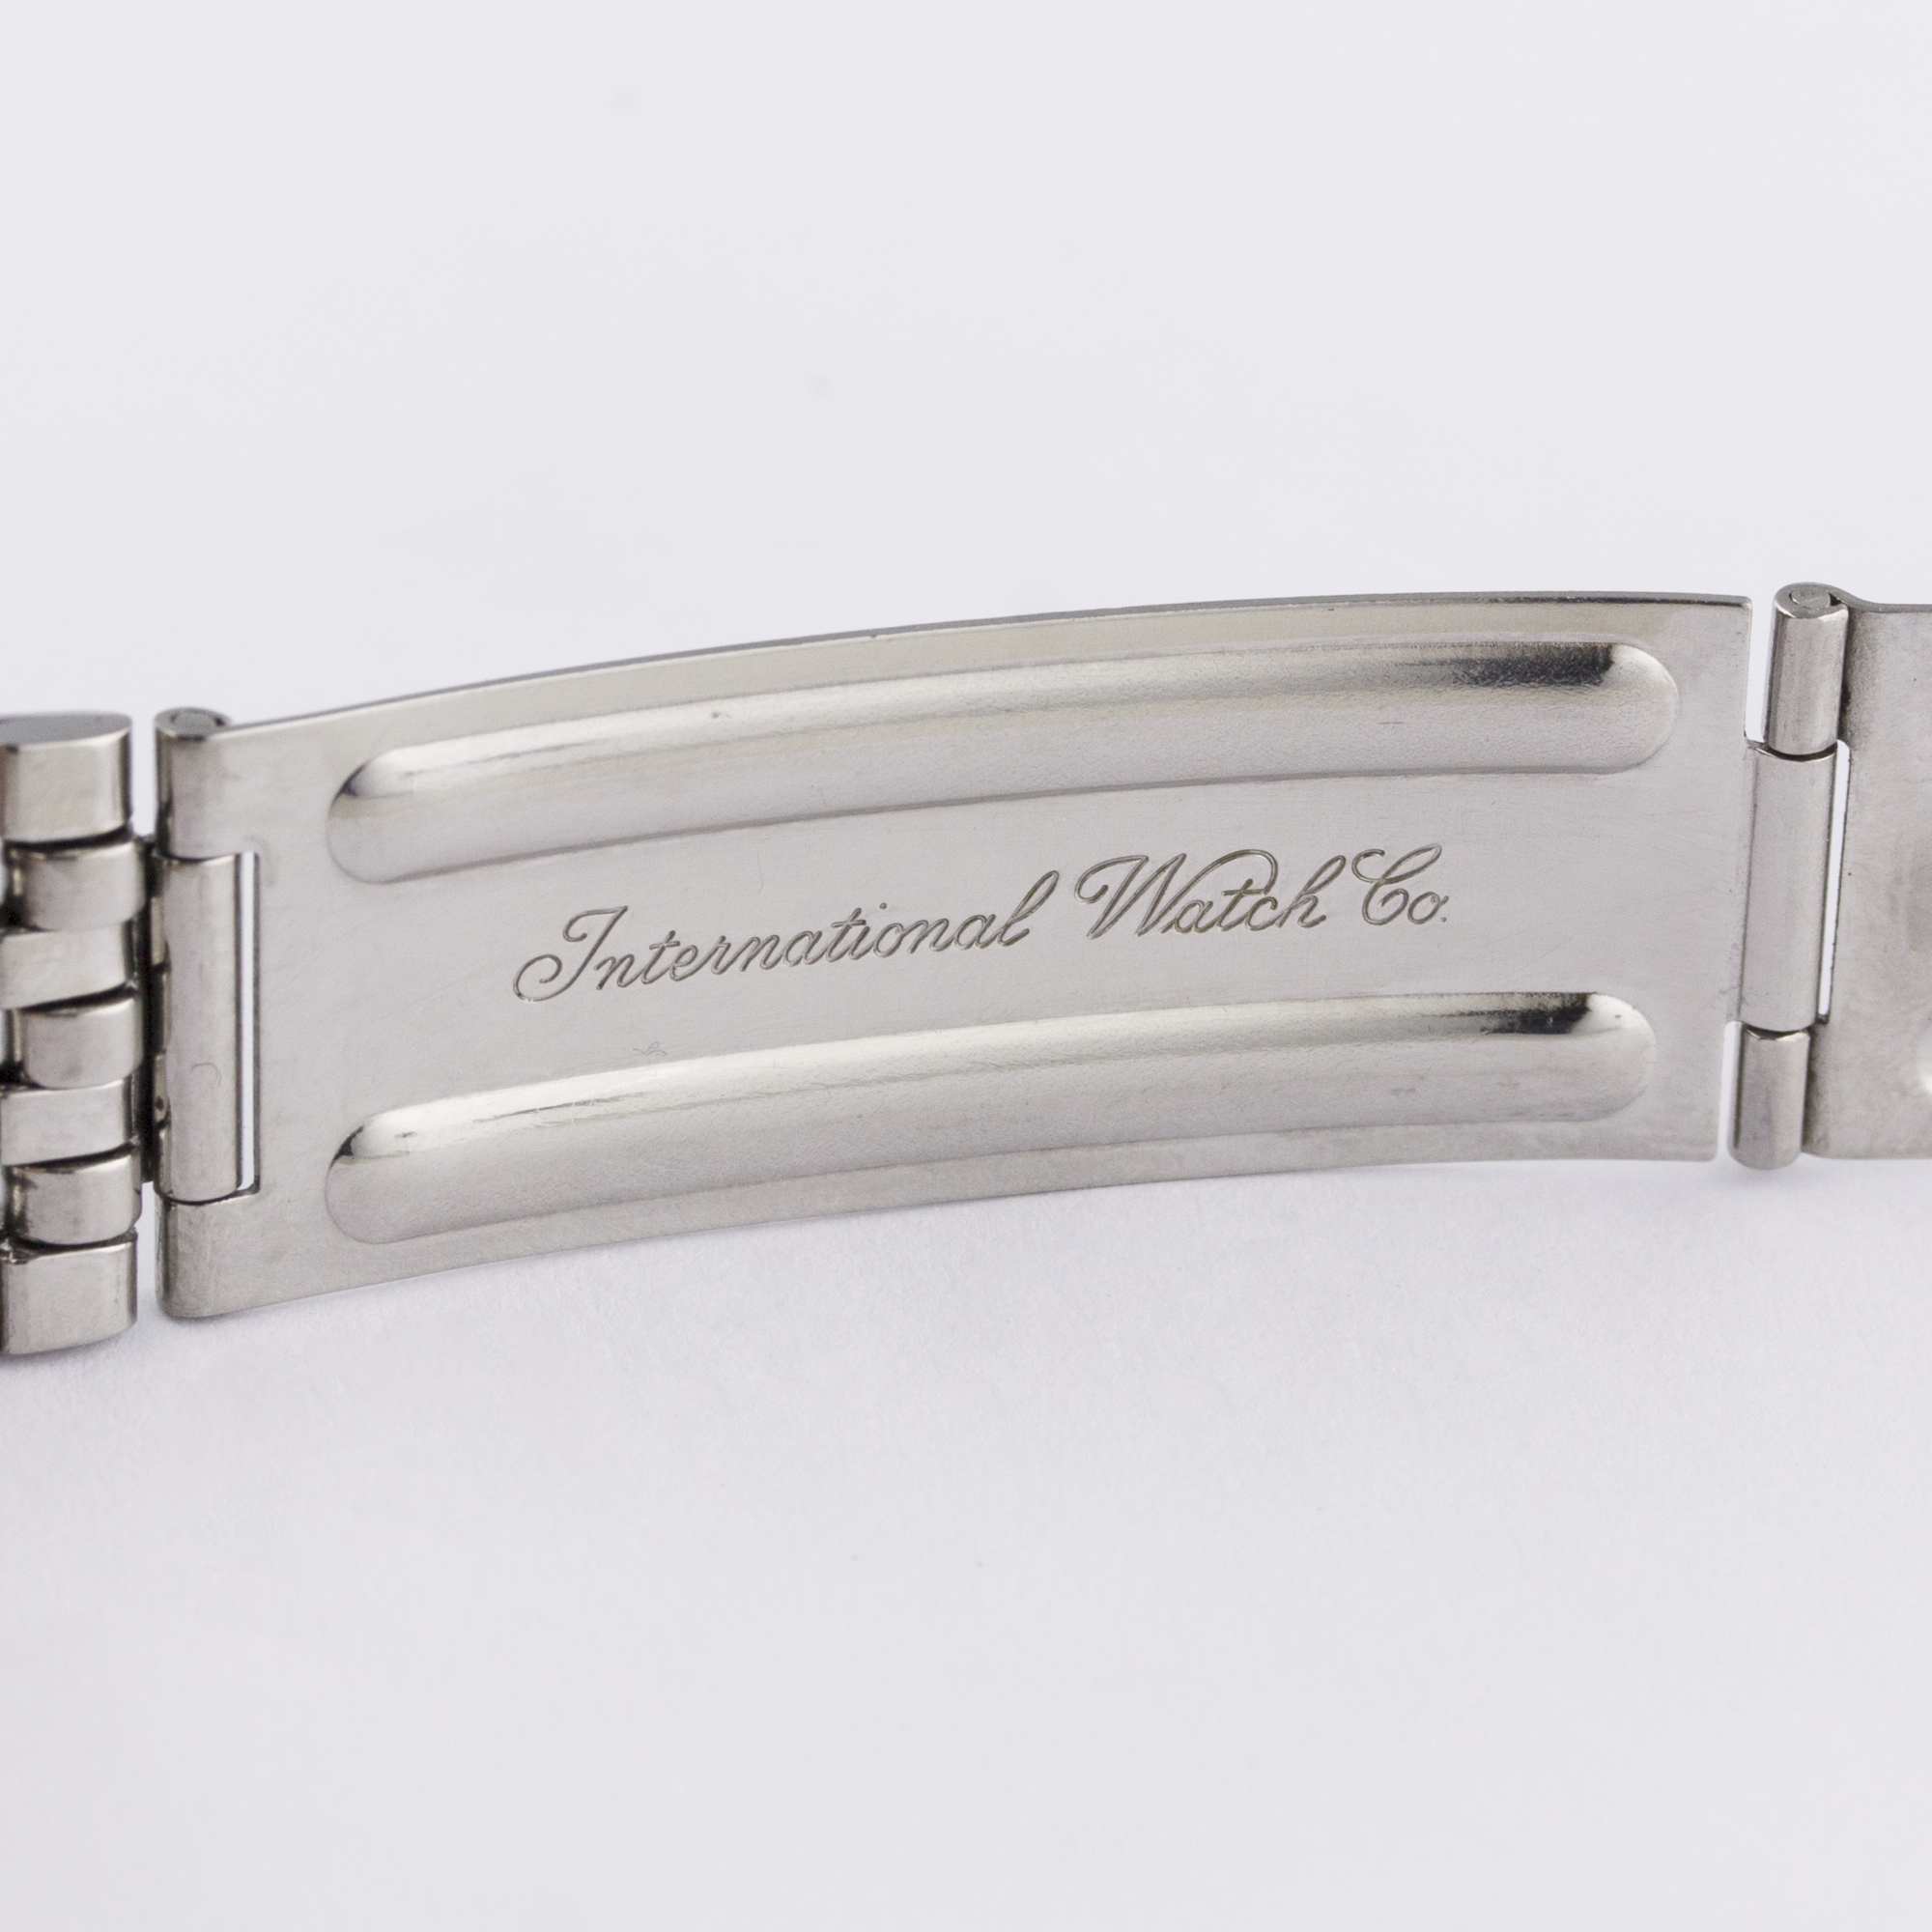 A RARE GENTLEMAN'S STAINLESS STEEL IWC YACHT CLUB AUTOMATIC BRACELET WATCH CIRCA 1971, REF. R811 - Image 10 of 11